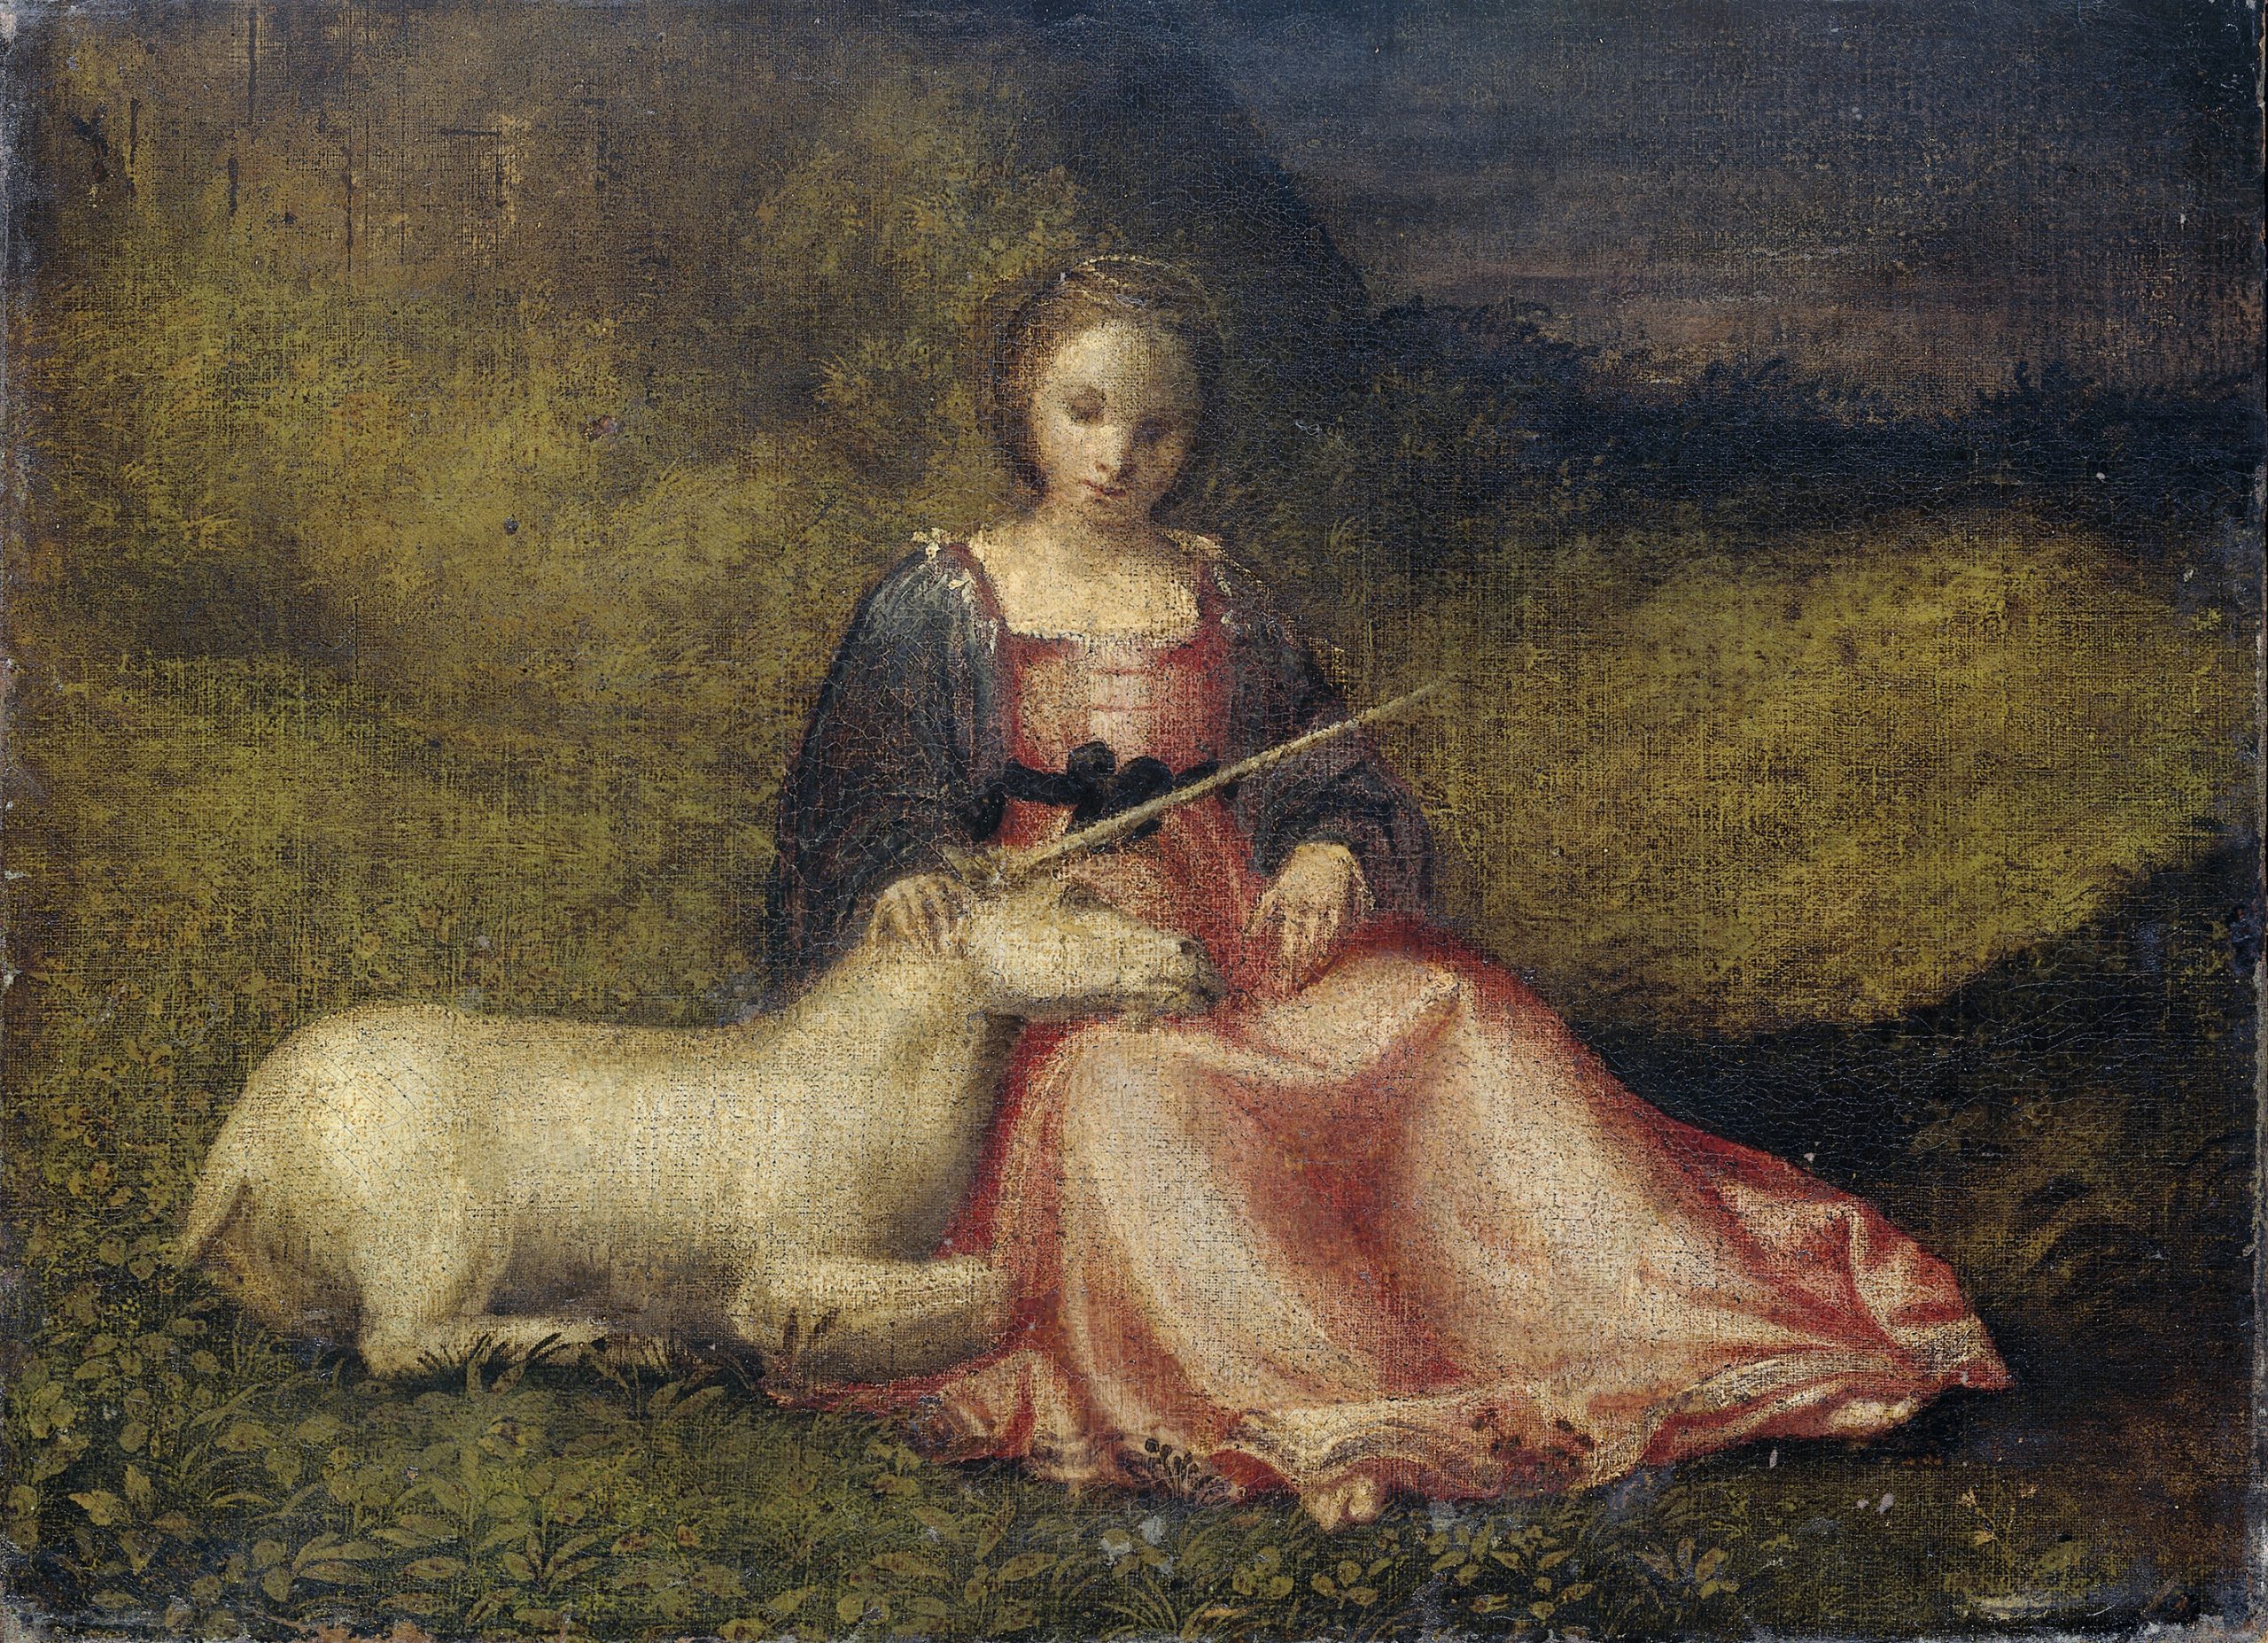 A young woman sits on the ground and looks down towards a unicorn resting in her lap.